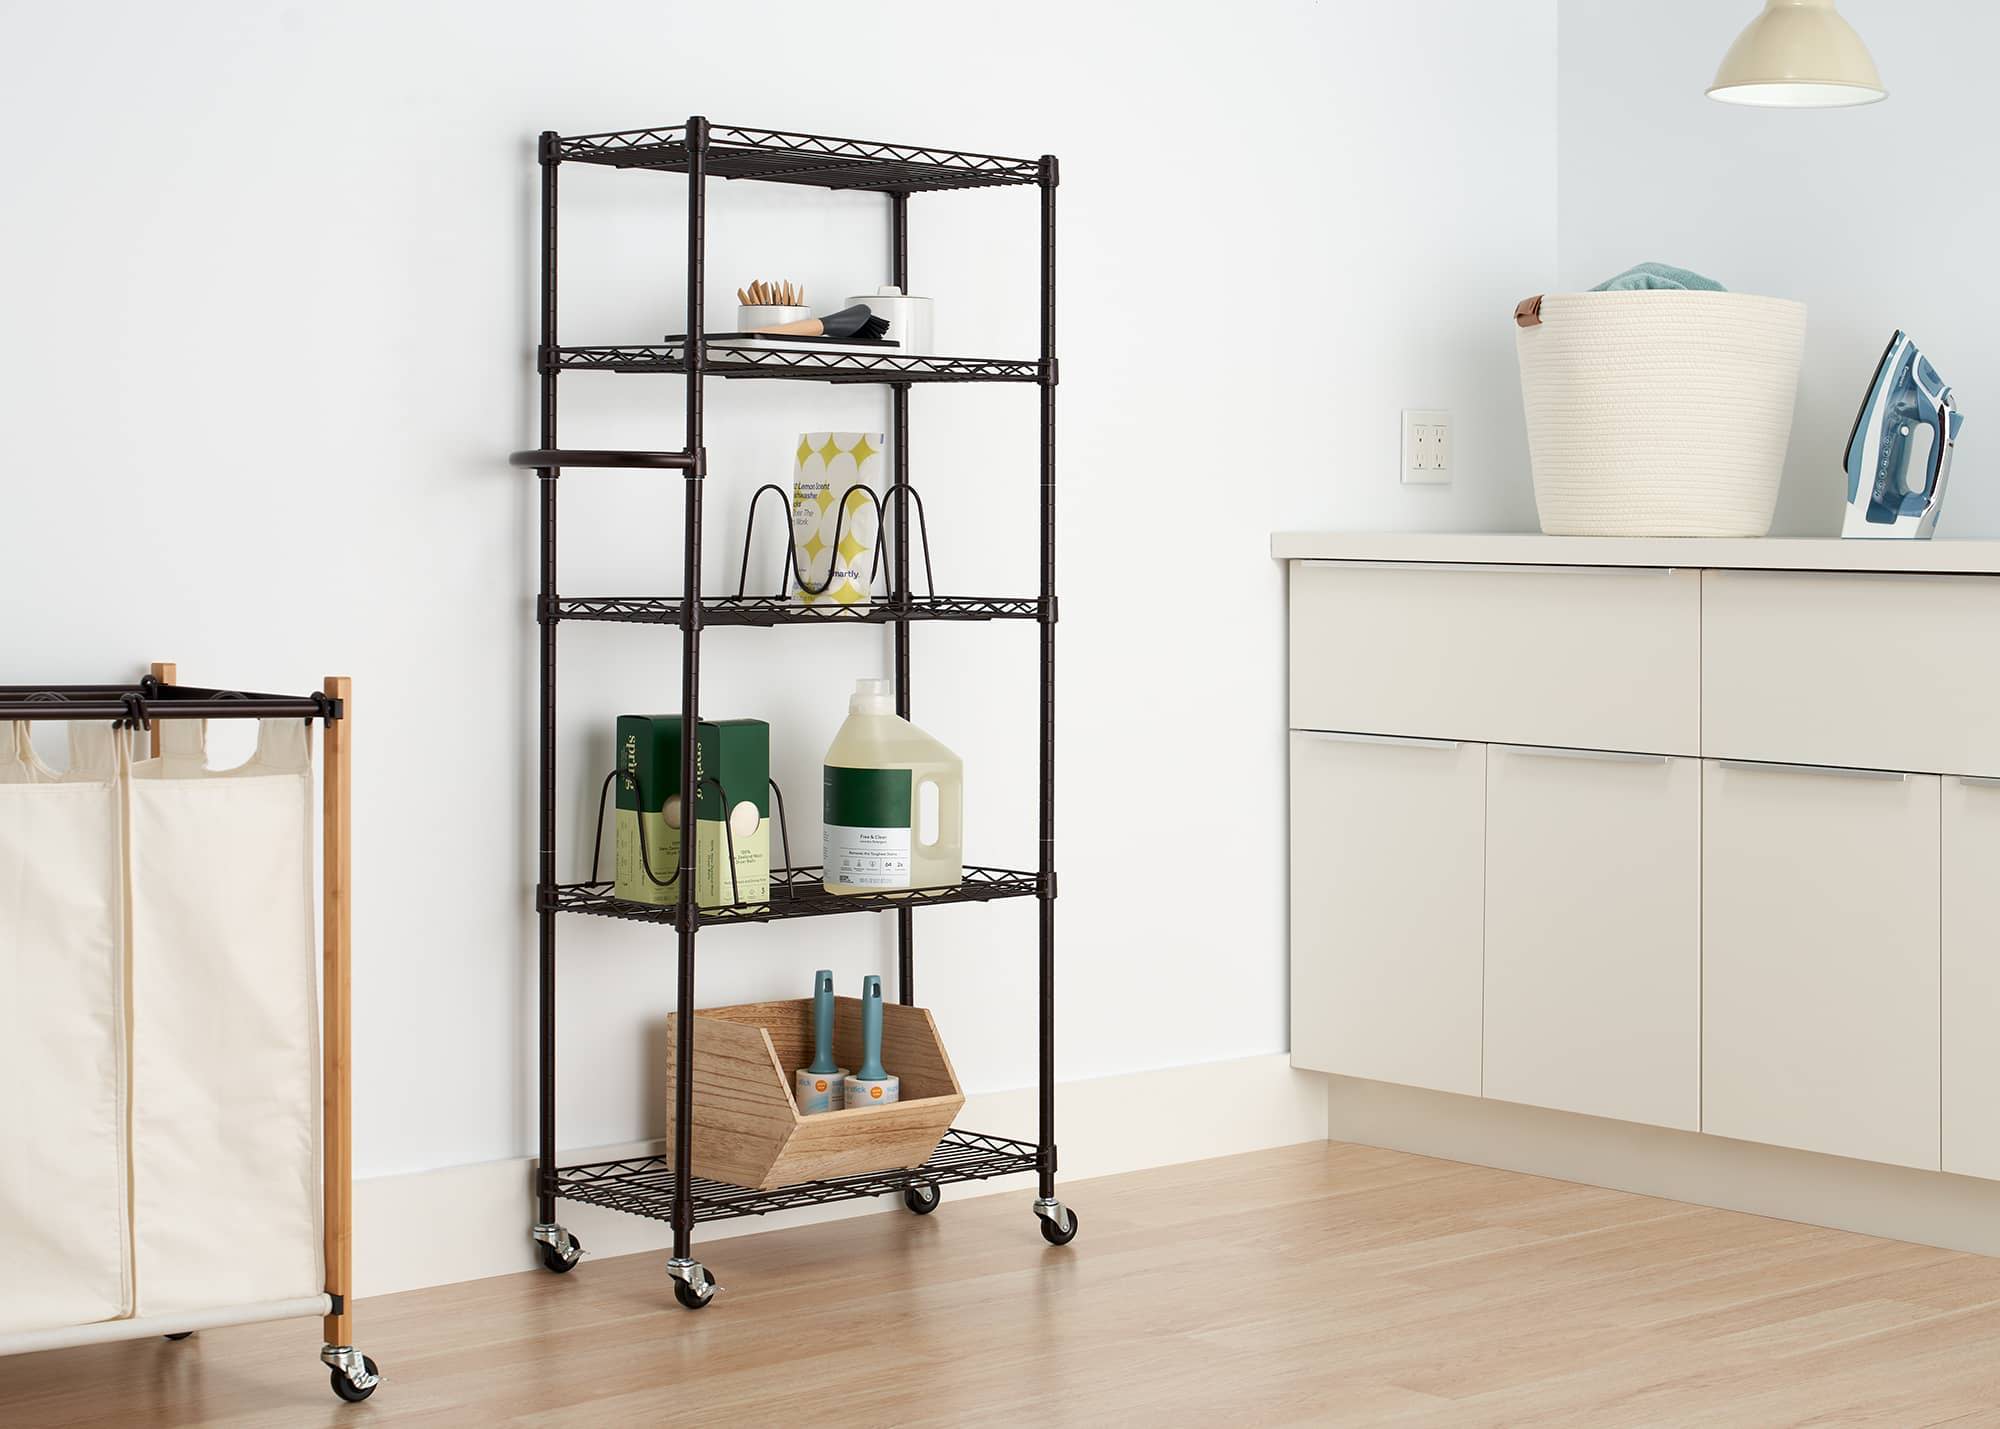 small size shelving rack in a laundry room